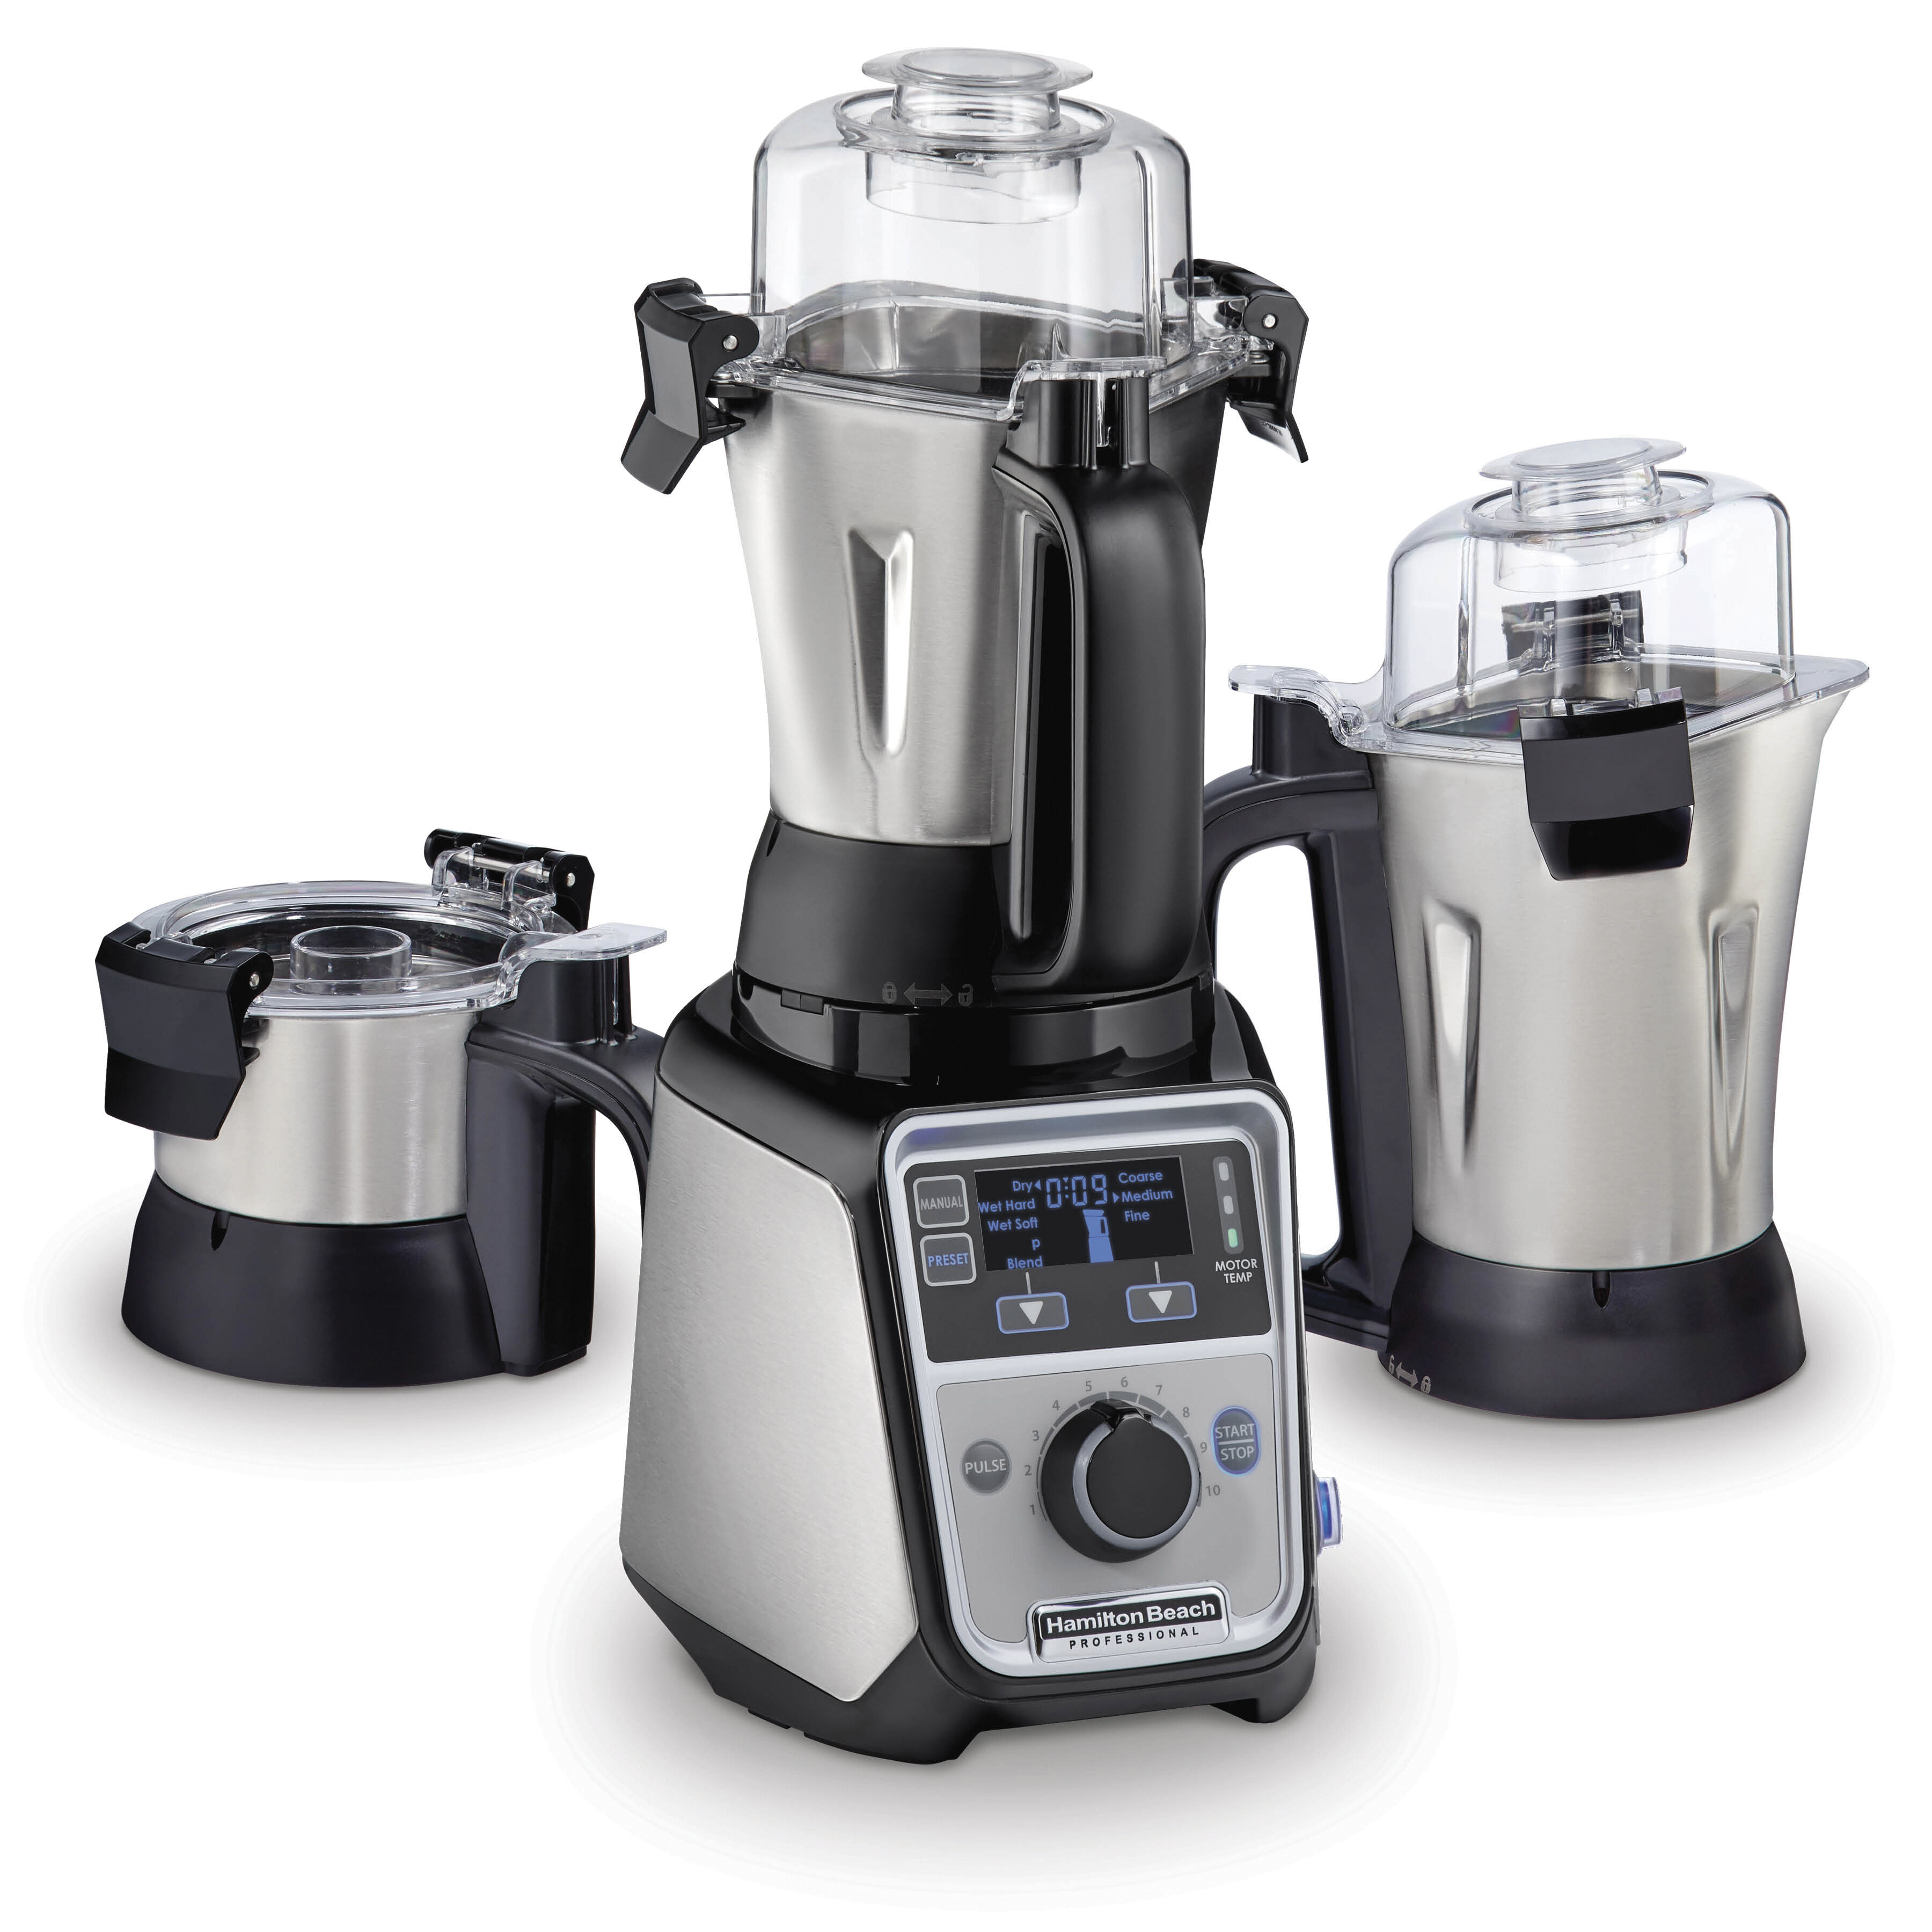 iCucina Professional-Grade High Speed Blender, 64 oz, Precision Control for  Any Consistency in Smoothies, Hot Soups, Frozen Desserts, and More